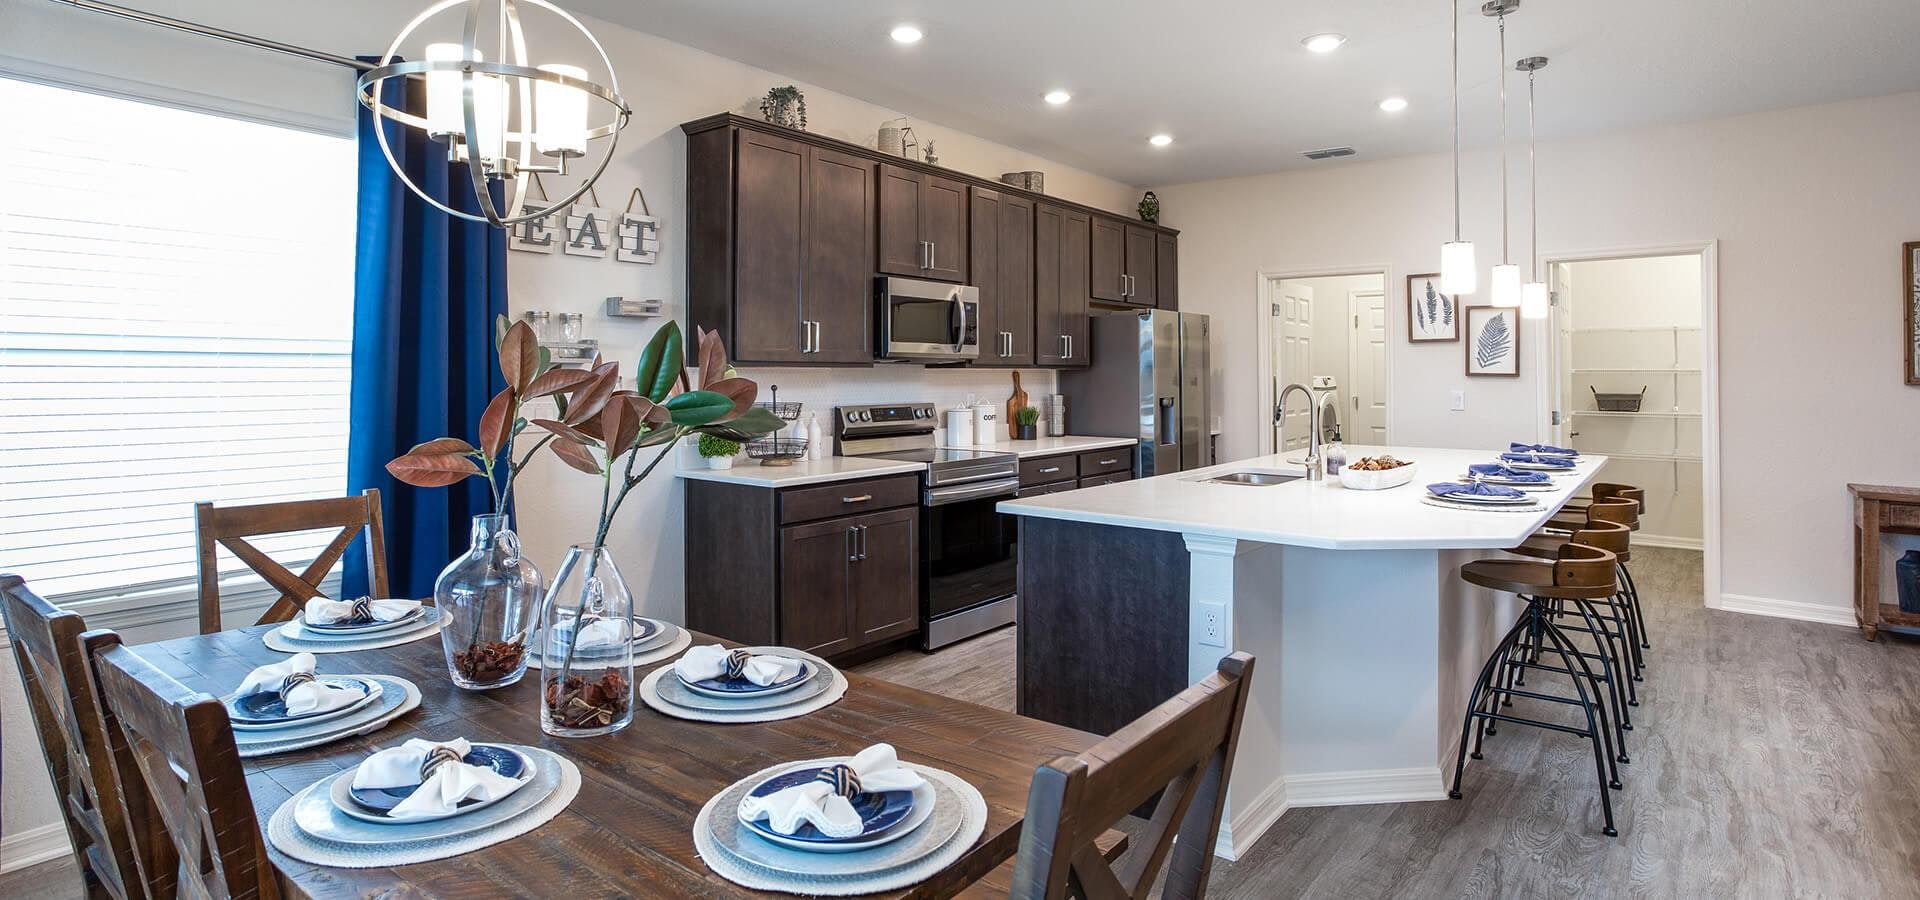 Kitchen in the Highland Homes at Astonia model home in Davenport, FL